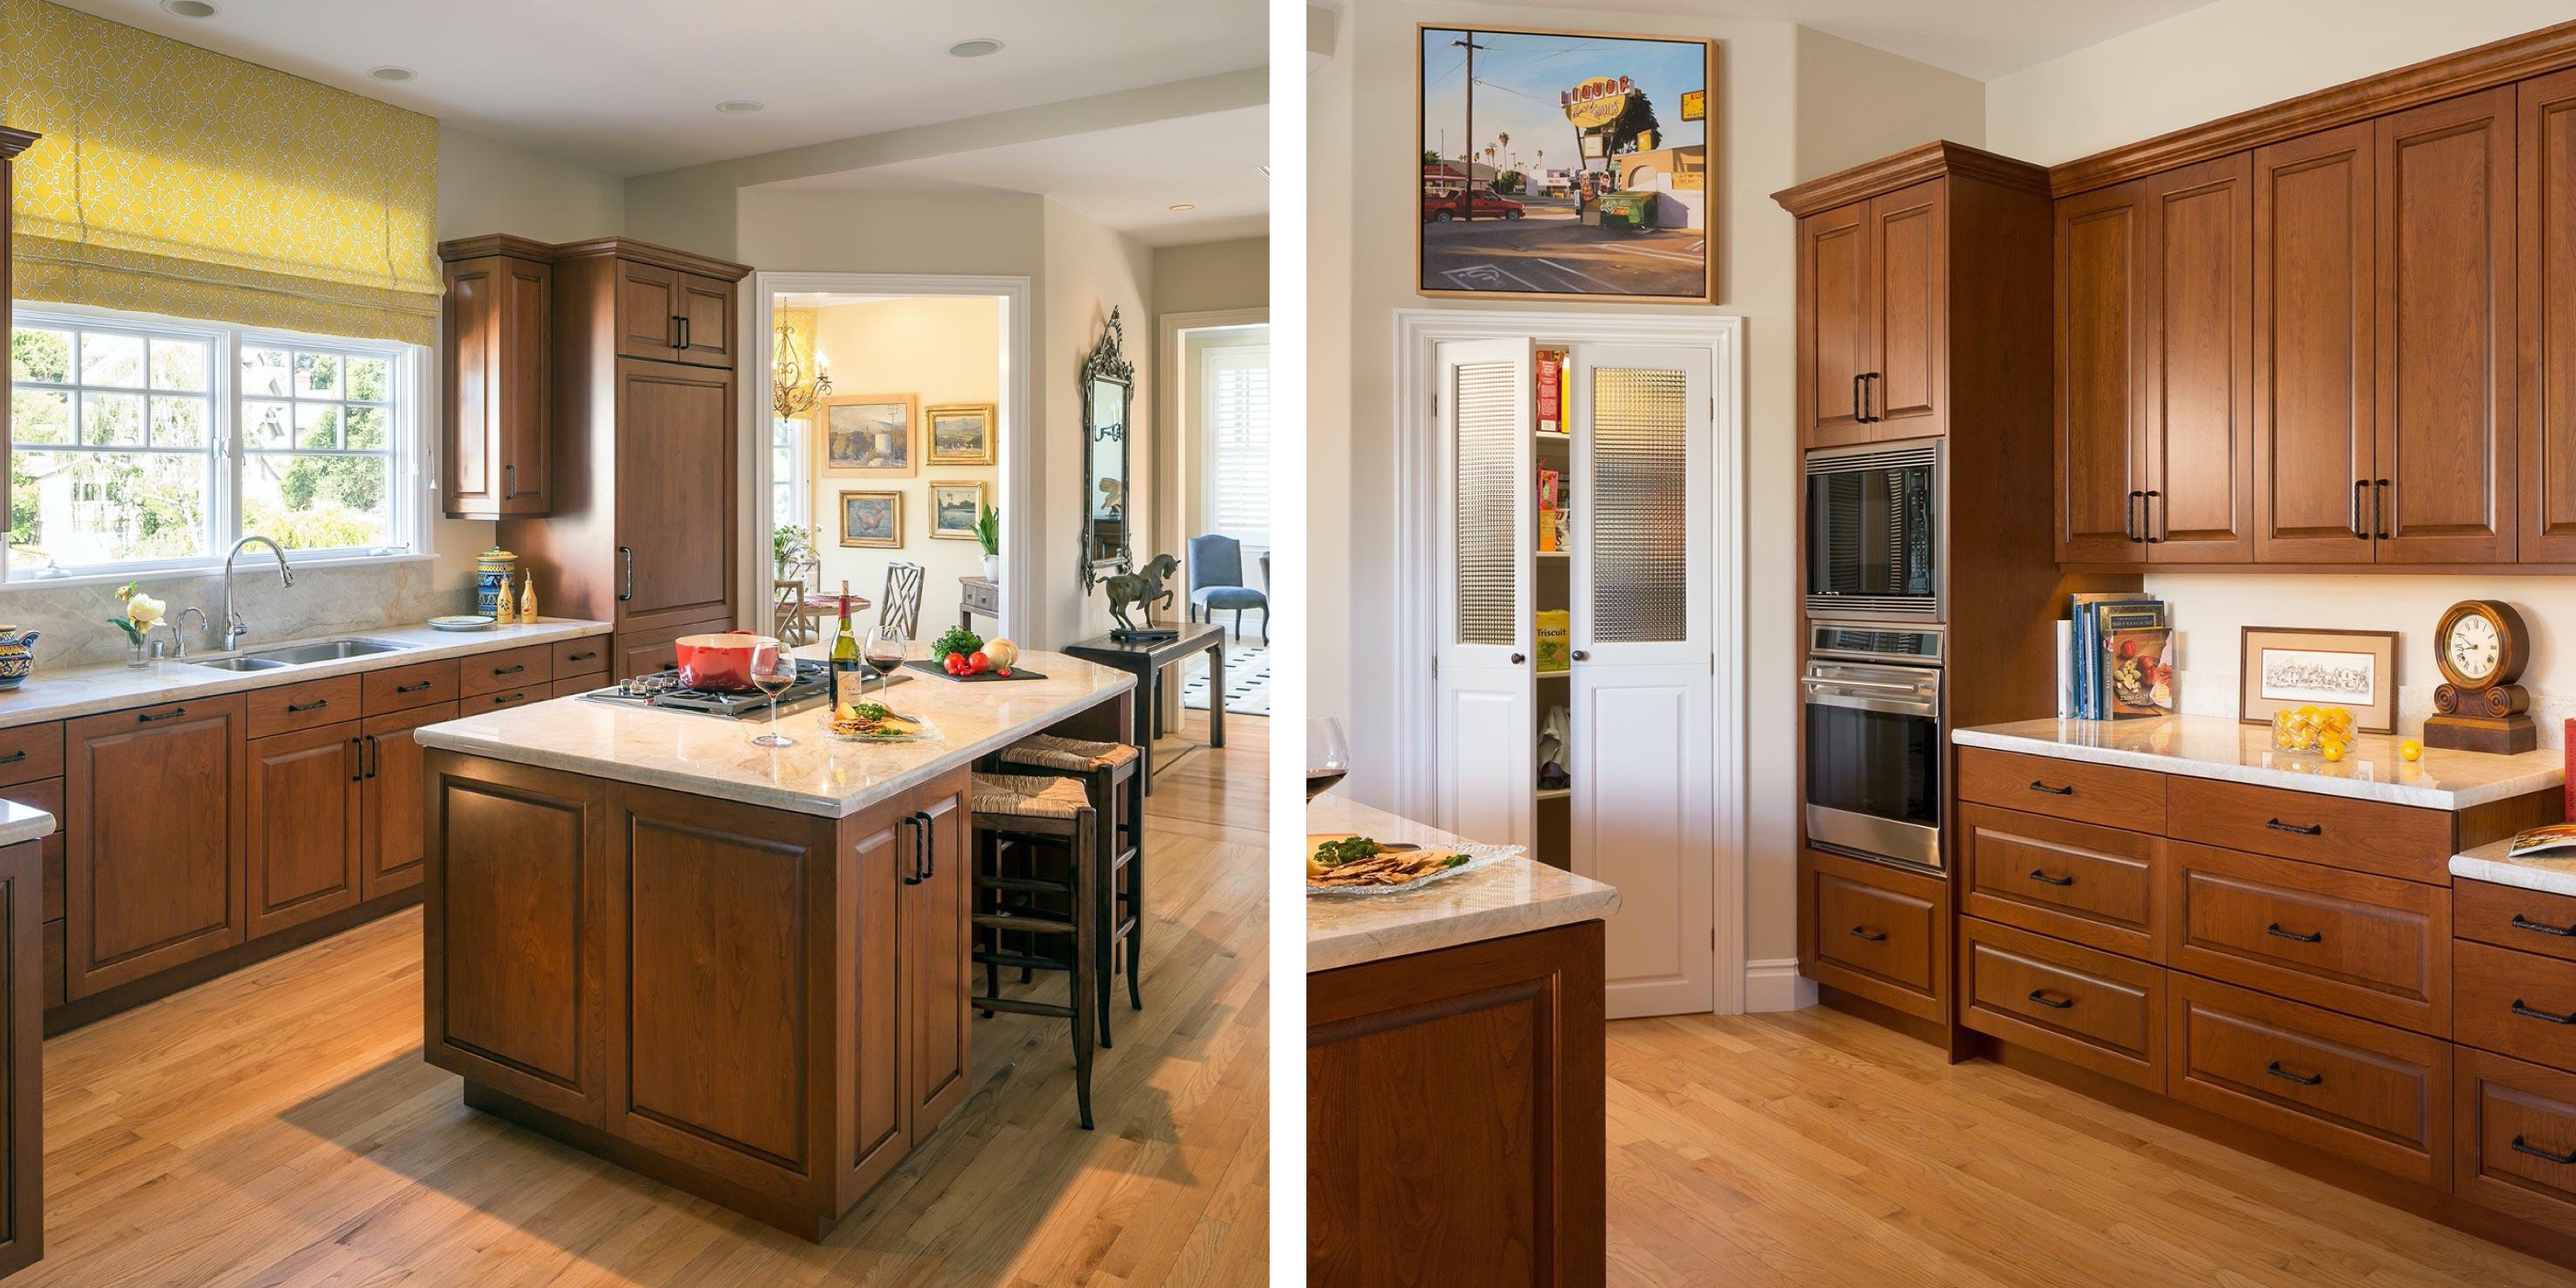 5 Design Elements That Will Revitalize Your Kitchen in the East Bay - Kitchen Remodel - Island countertop - Custom Kitchens